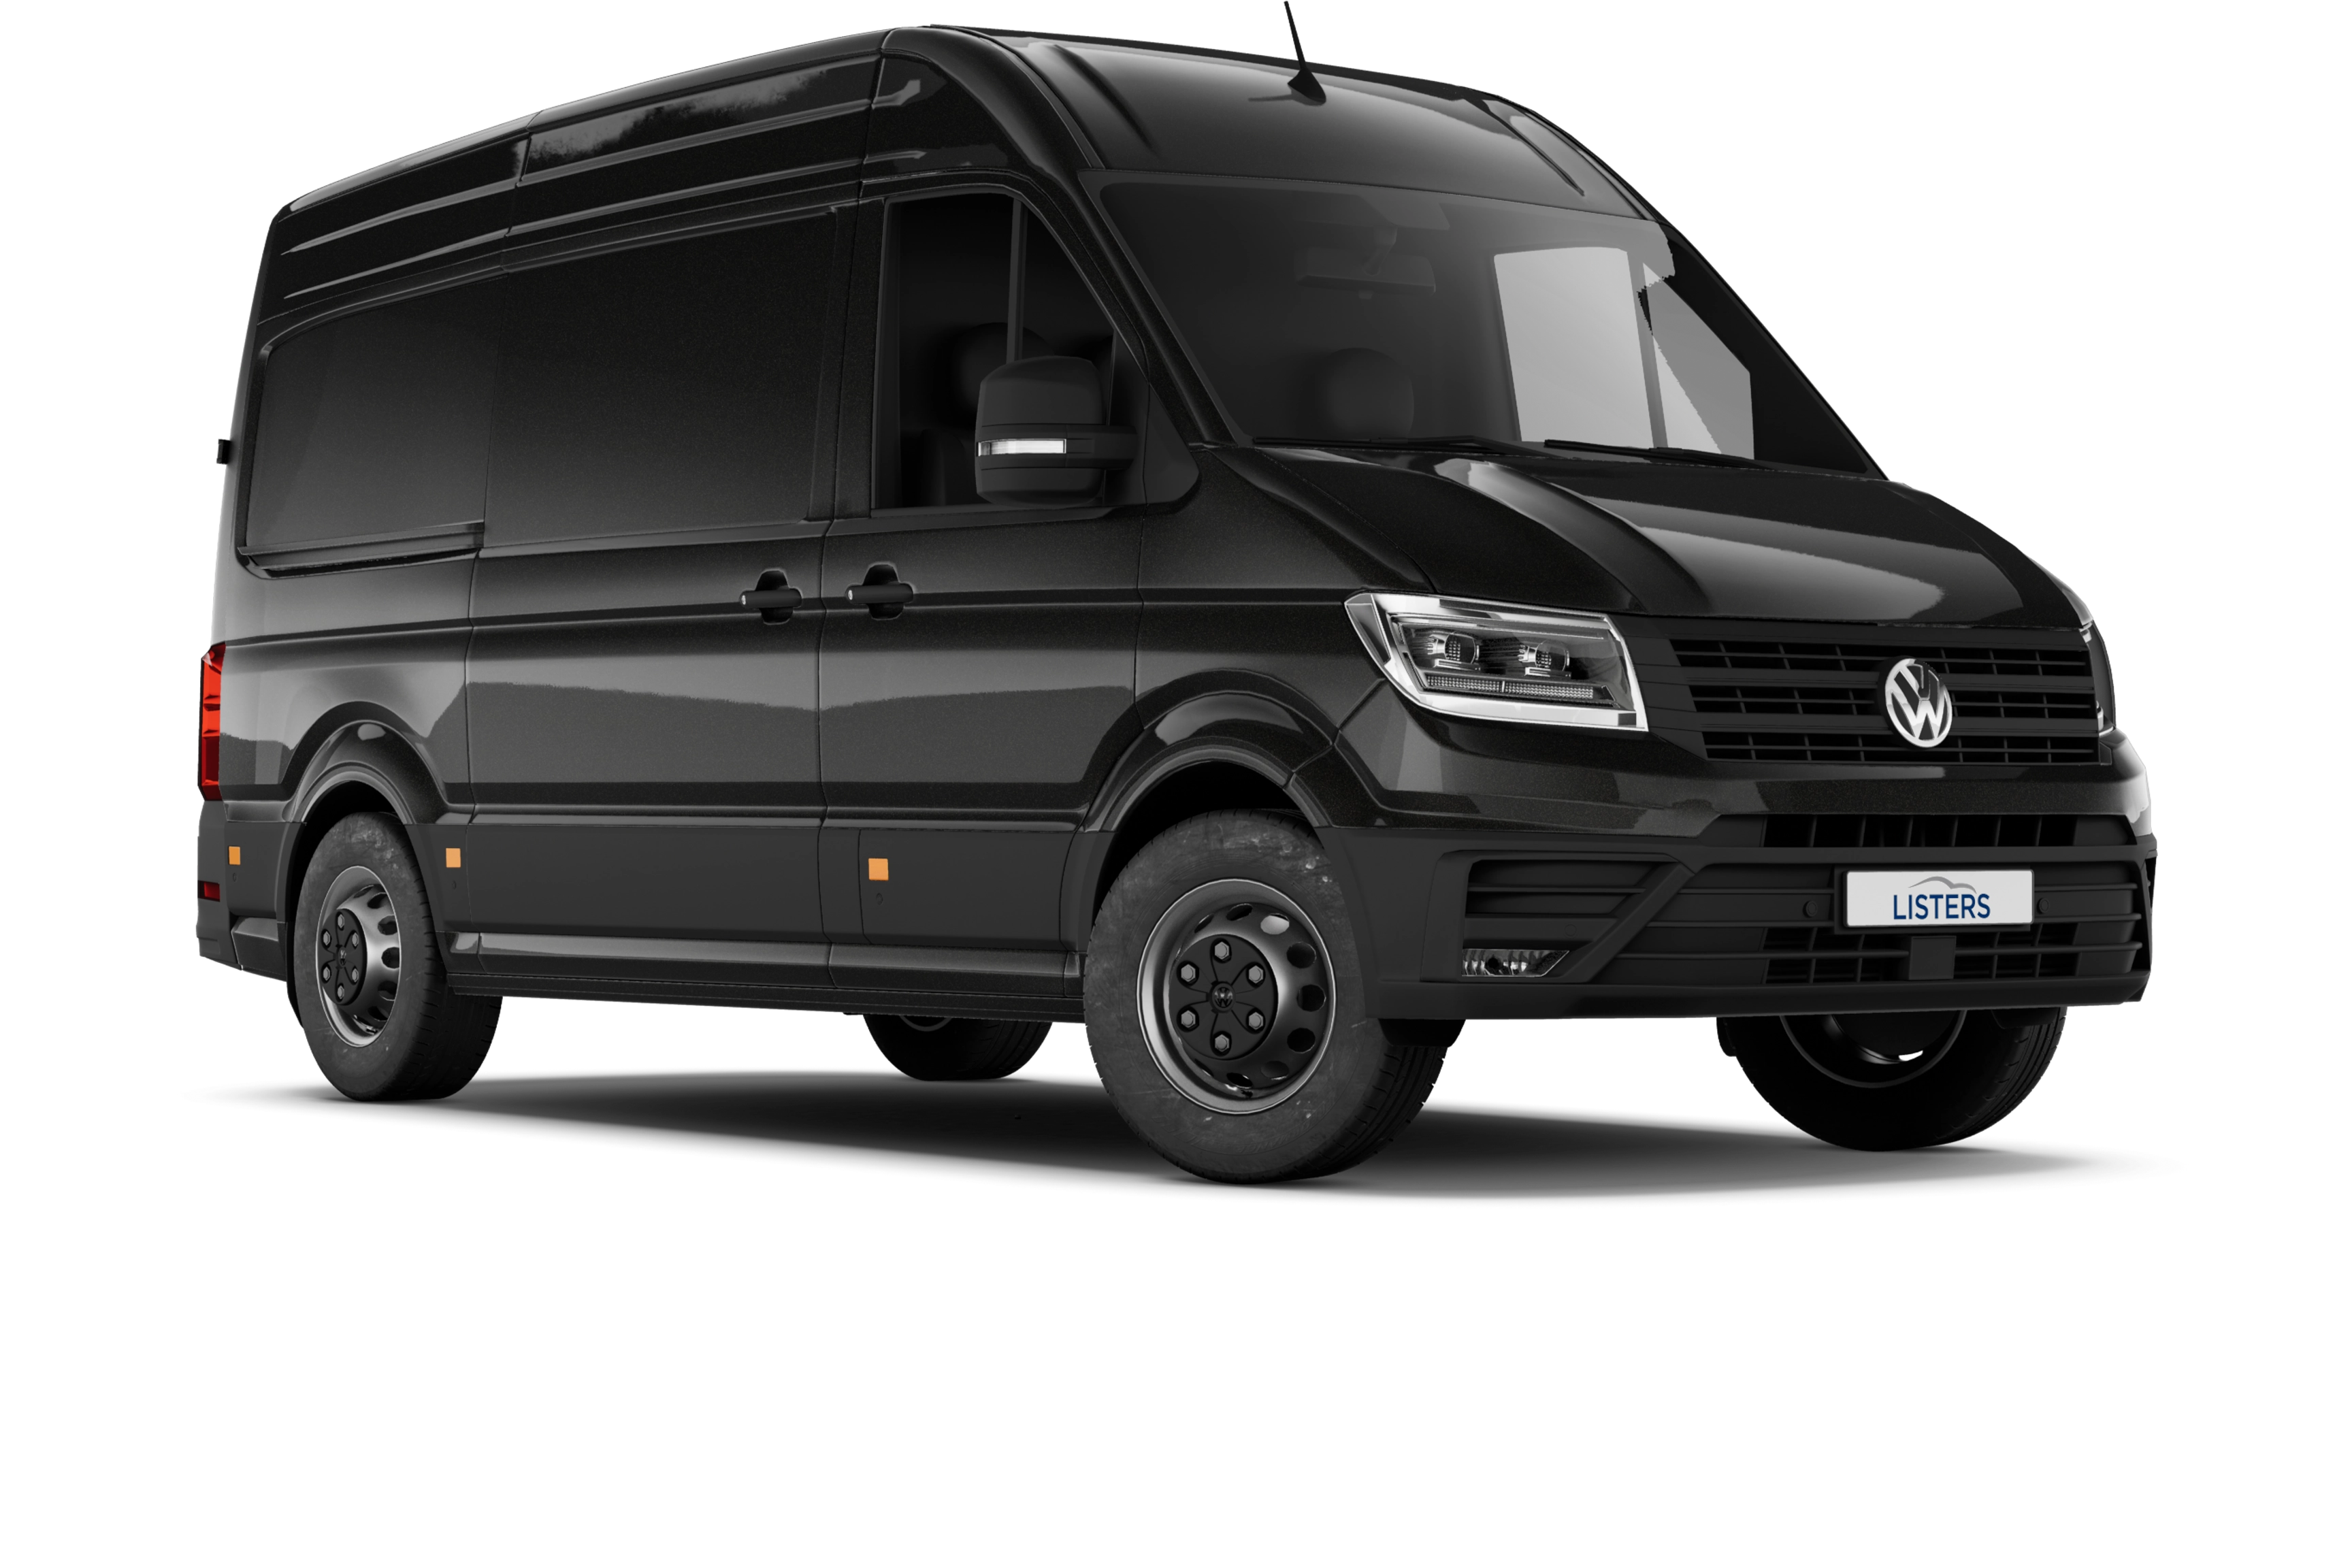 Volkswagen Crafter Contract Hire & Leasing Offers